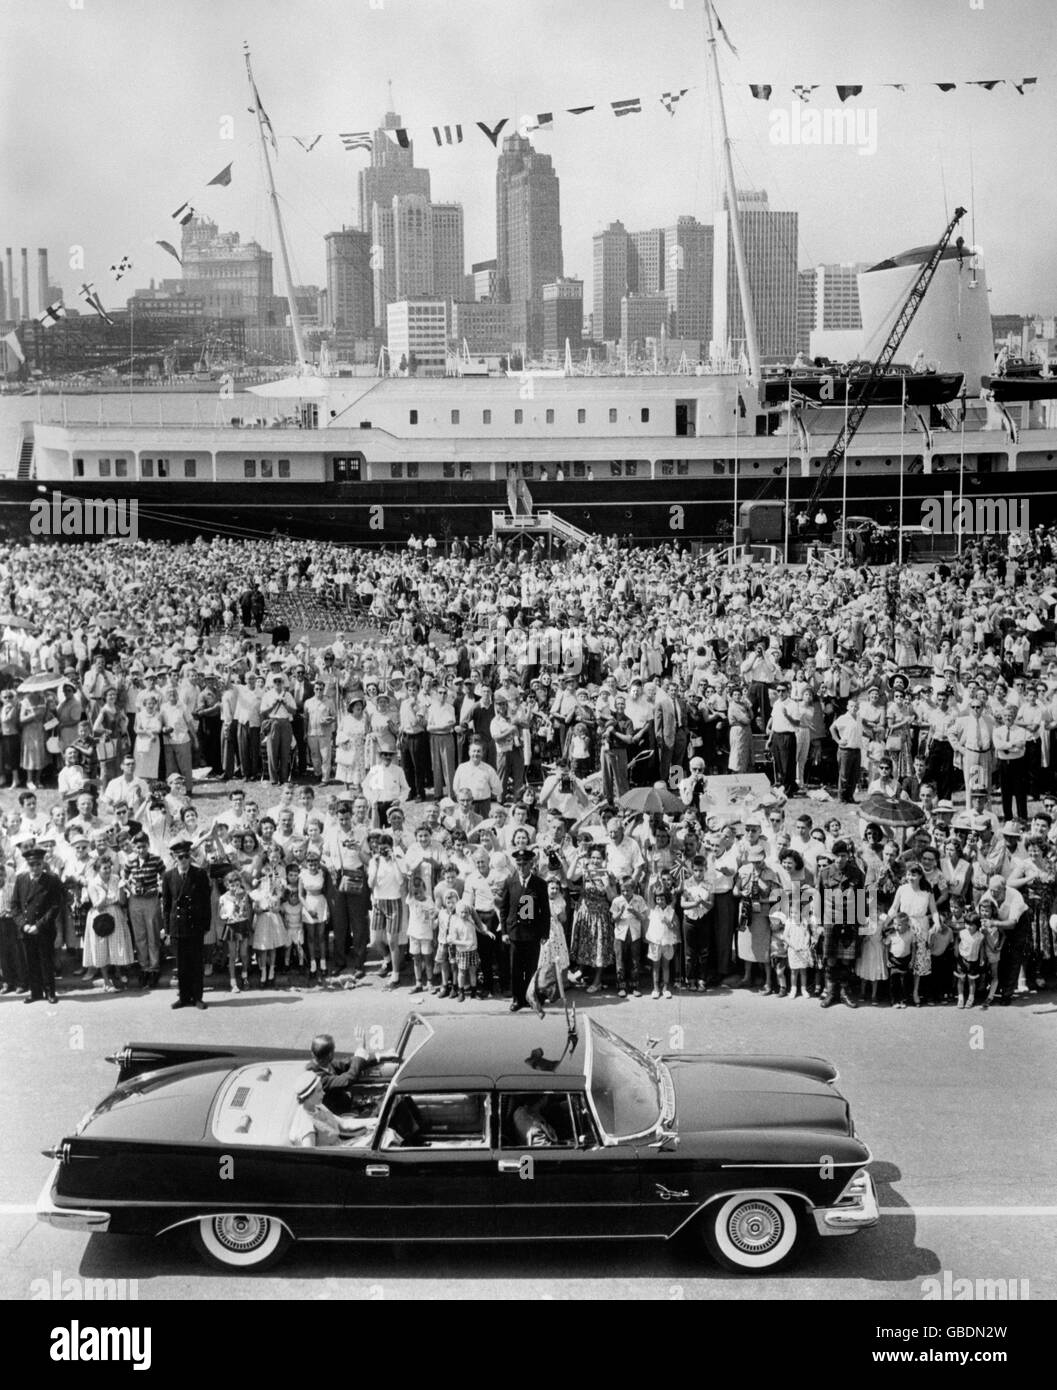 Queen Elizabeth II, the Duke of Edinburgh, cheering Canadians and Americans, Royal Yacht 'Britannia' and the famous American skyline of Detroit, Michigan, are all seen in this impressive picture of the Royal Tour of Canada. Stock Photo